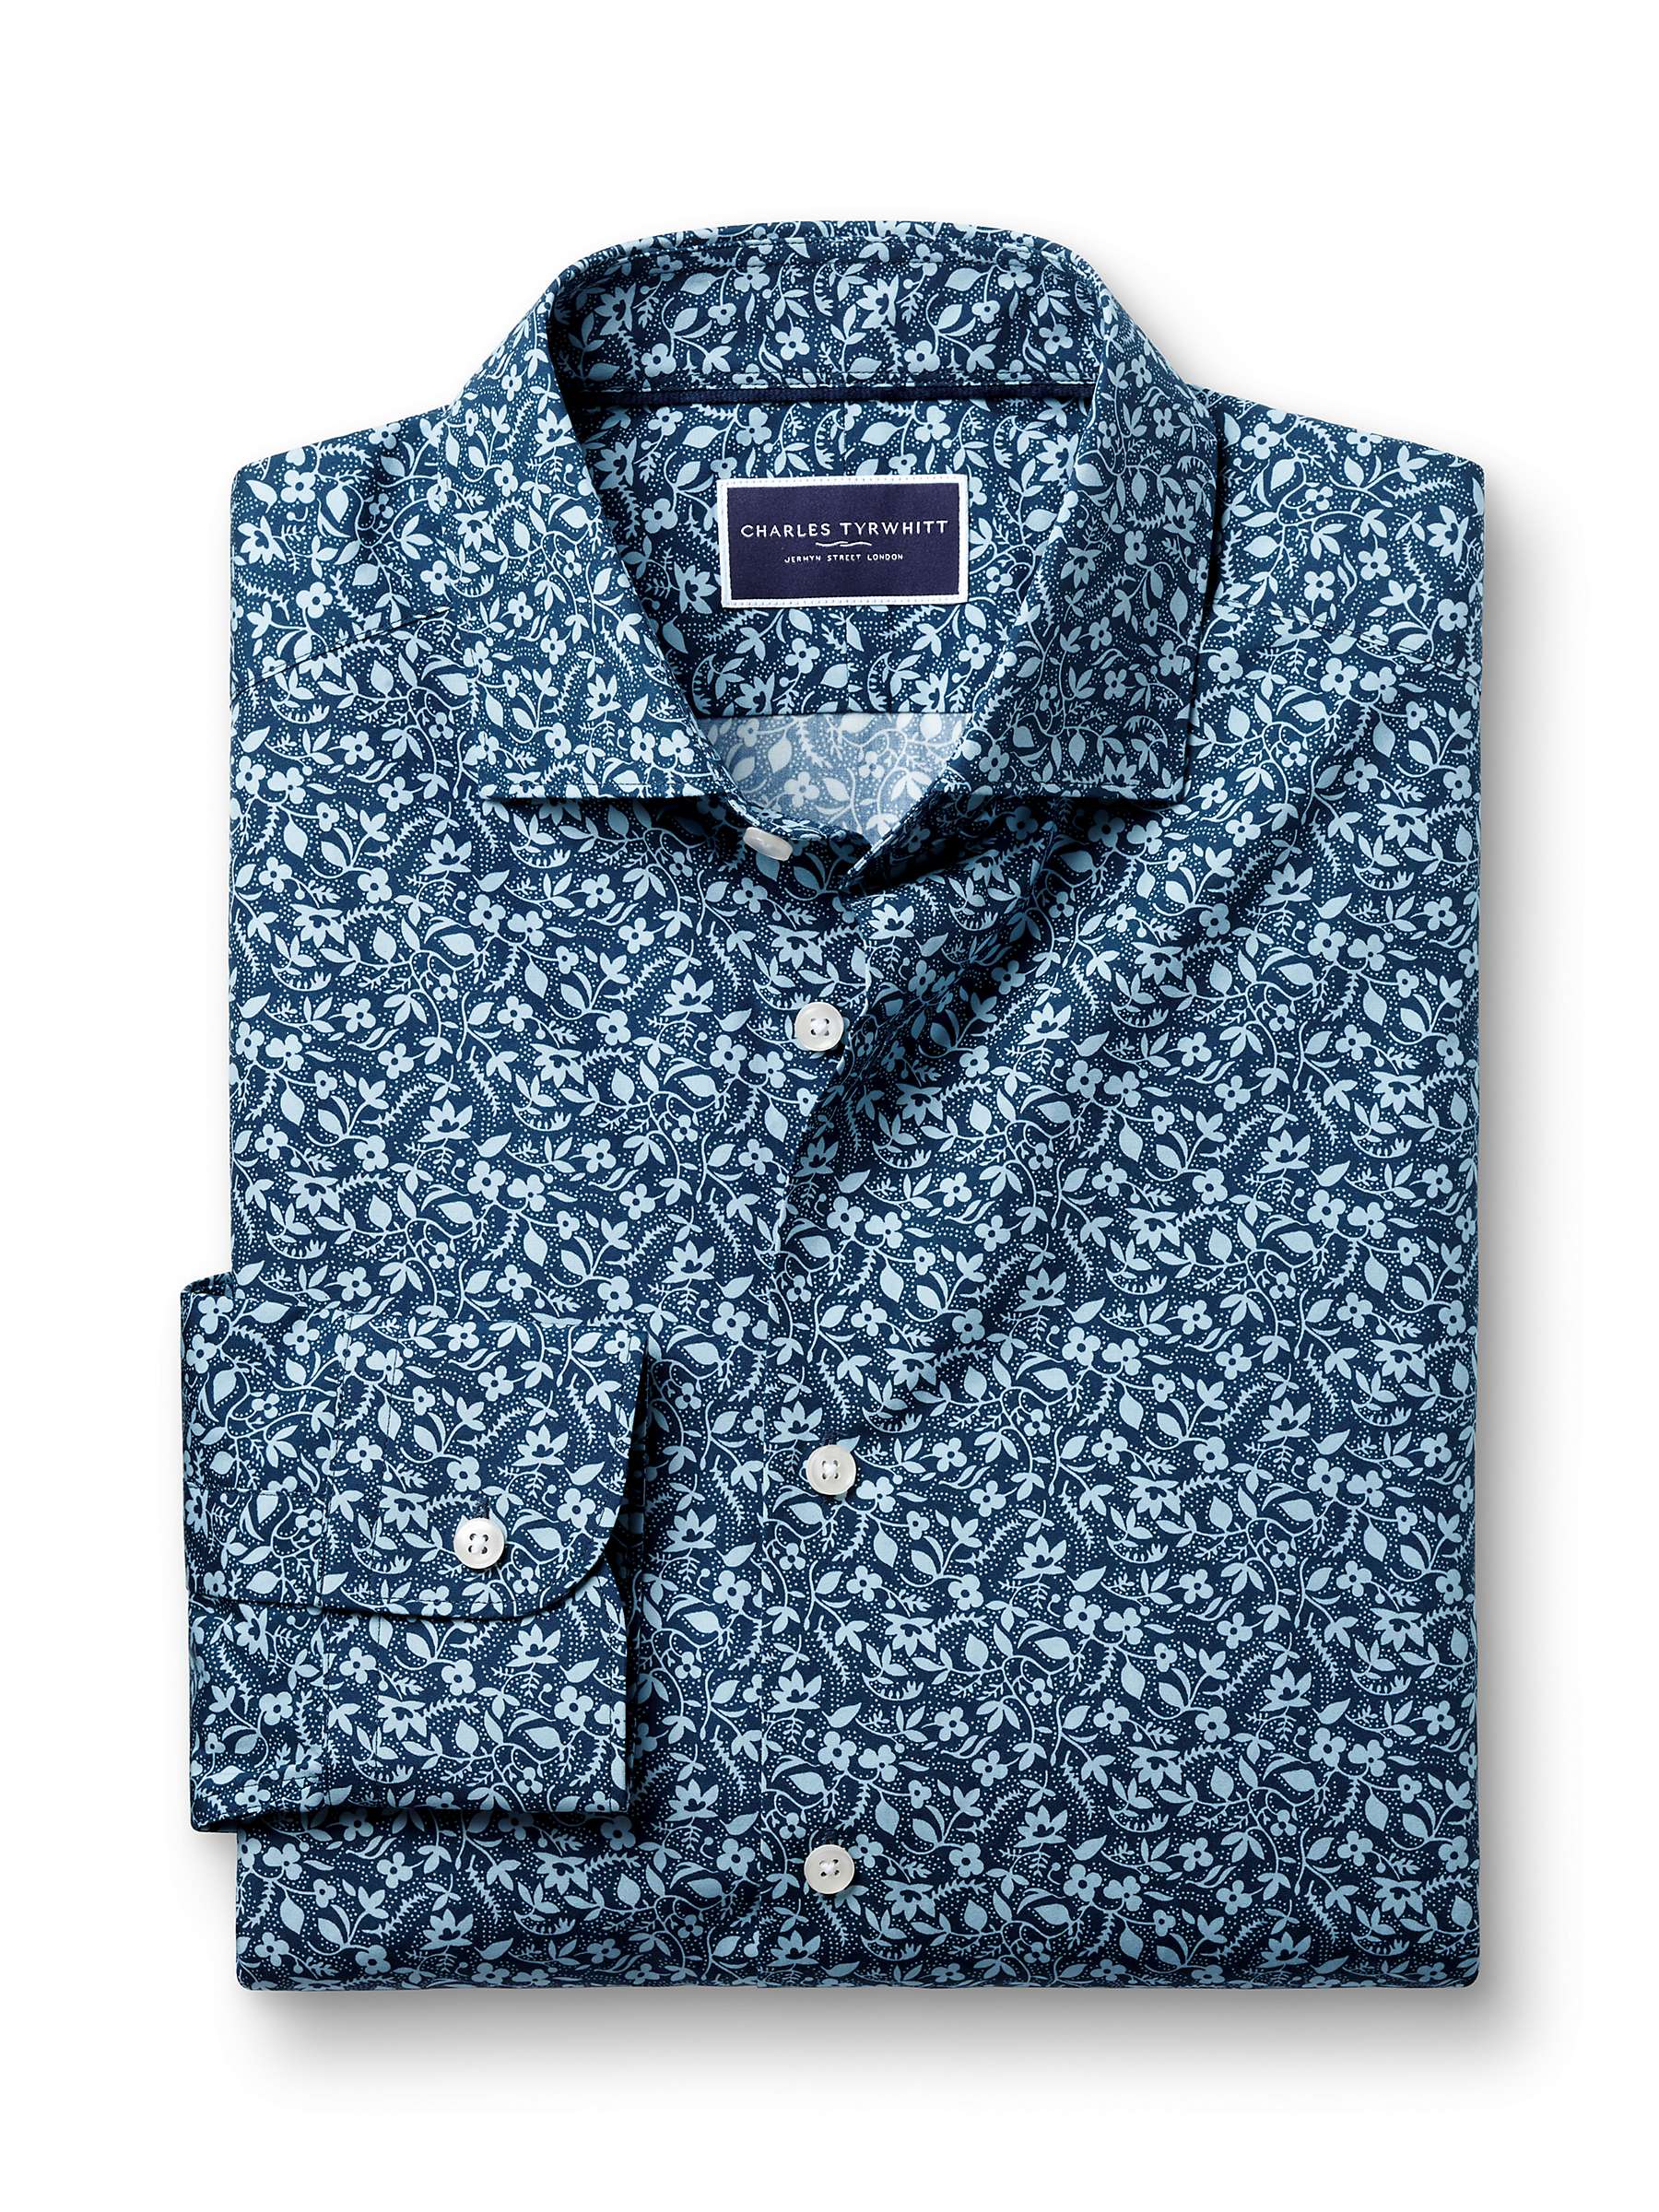 Buy Charles Tyrwhitt Classic Fit Floral Liberty Print Shirt, Steel Blue Online at johnlewis.com